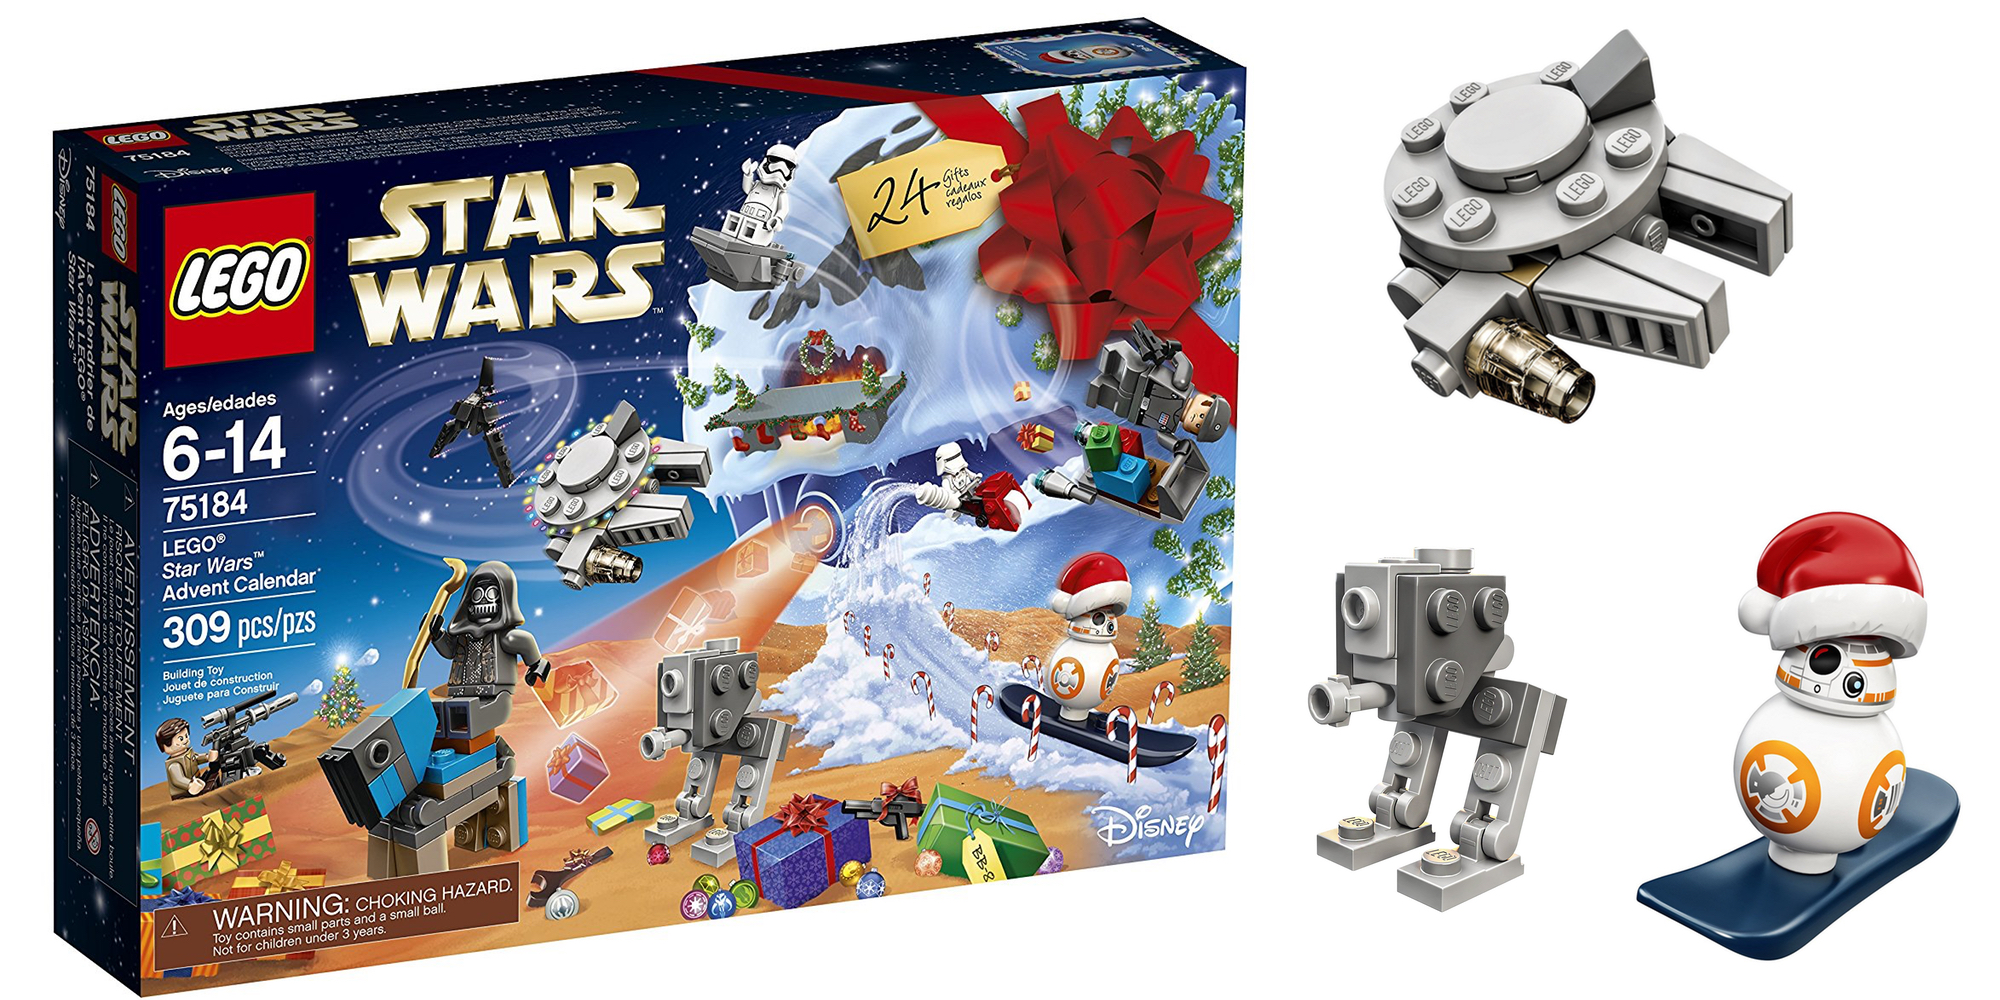 LEGO Star Wars Advent Calendar hits alltime low at 32 shipped 9to5Toys